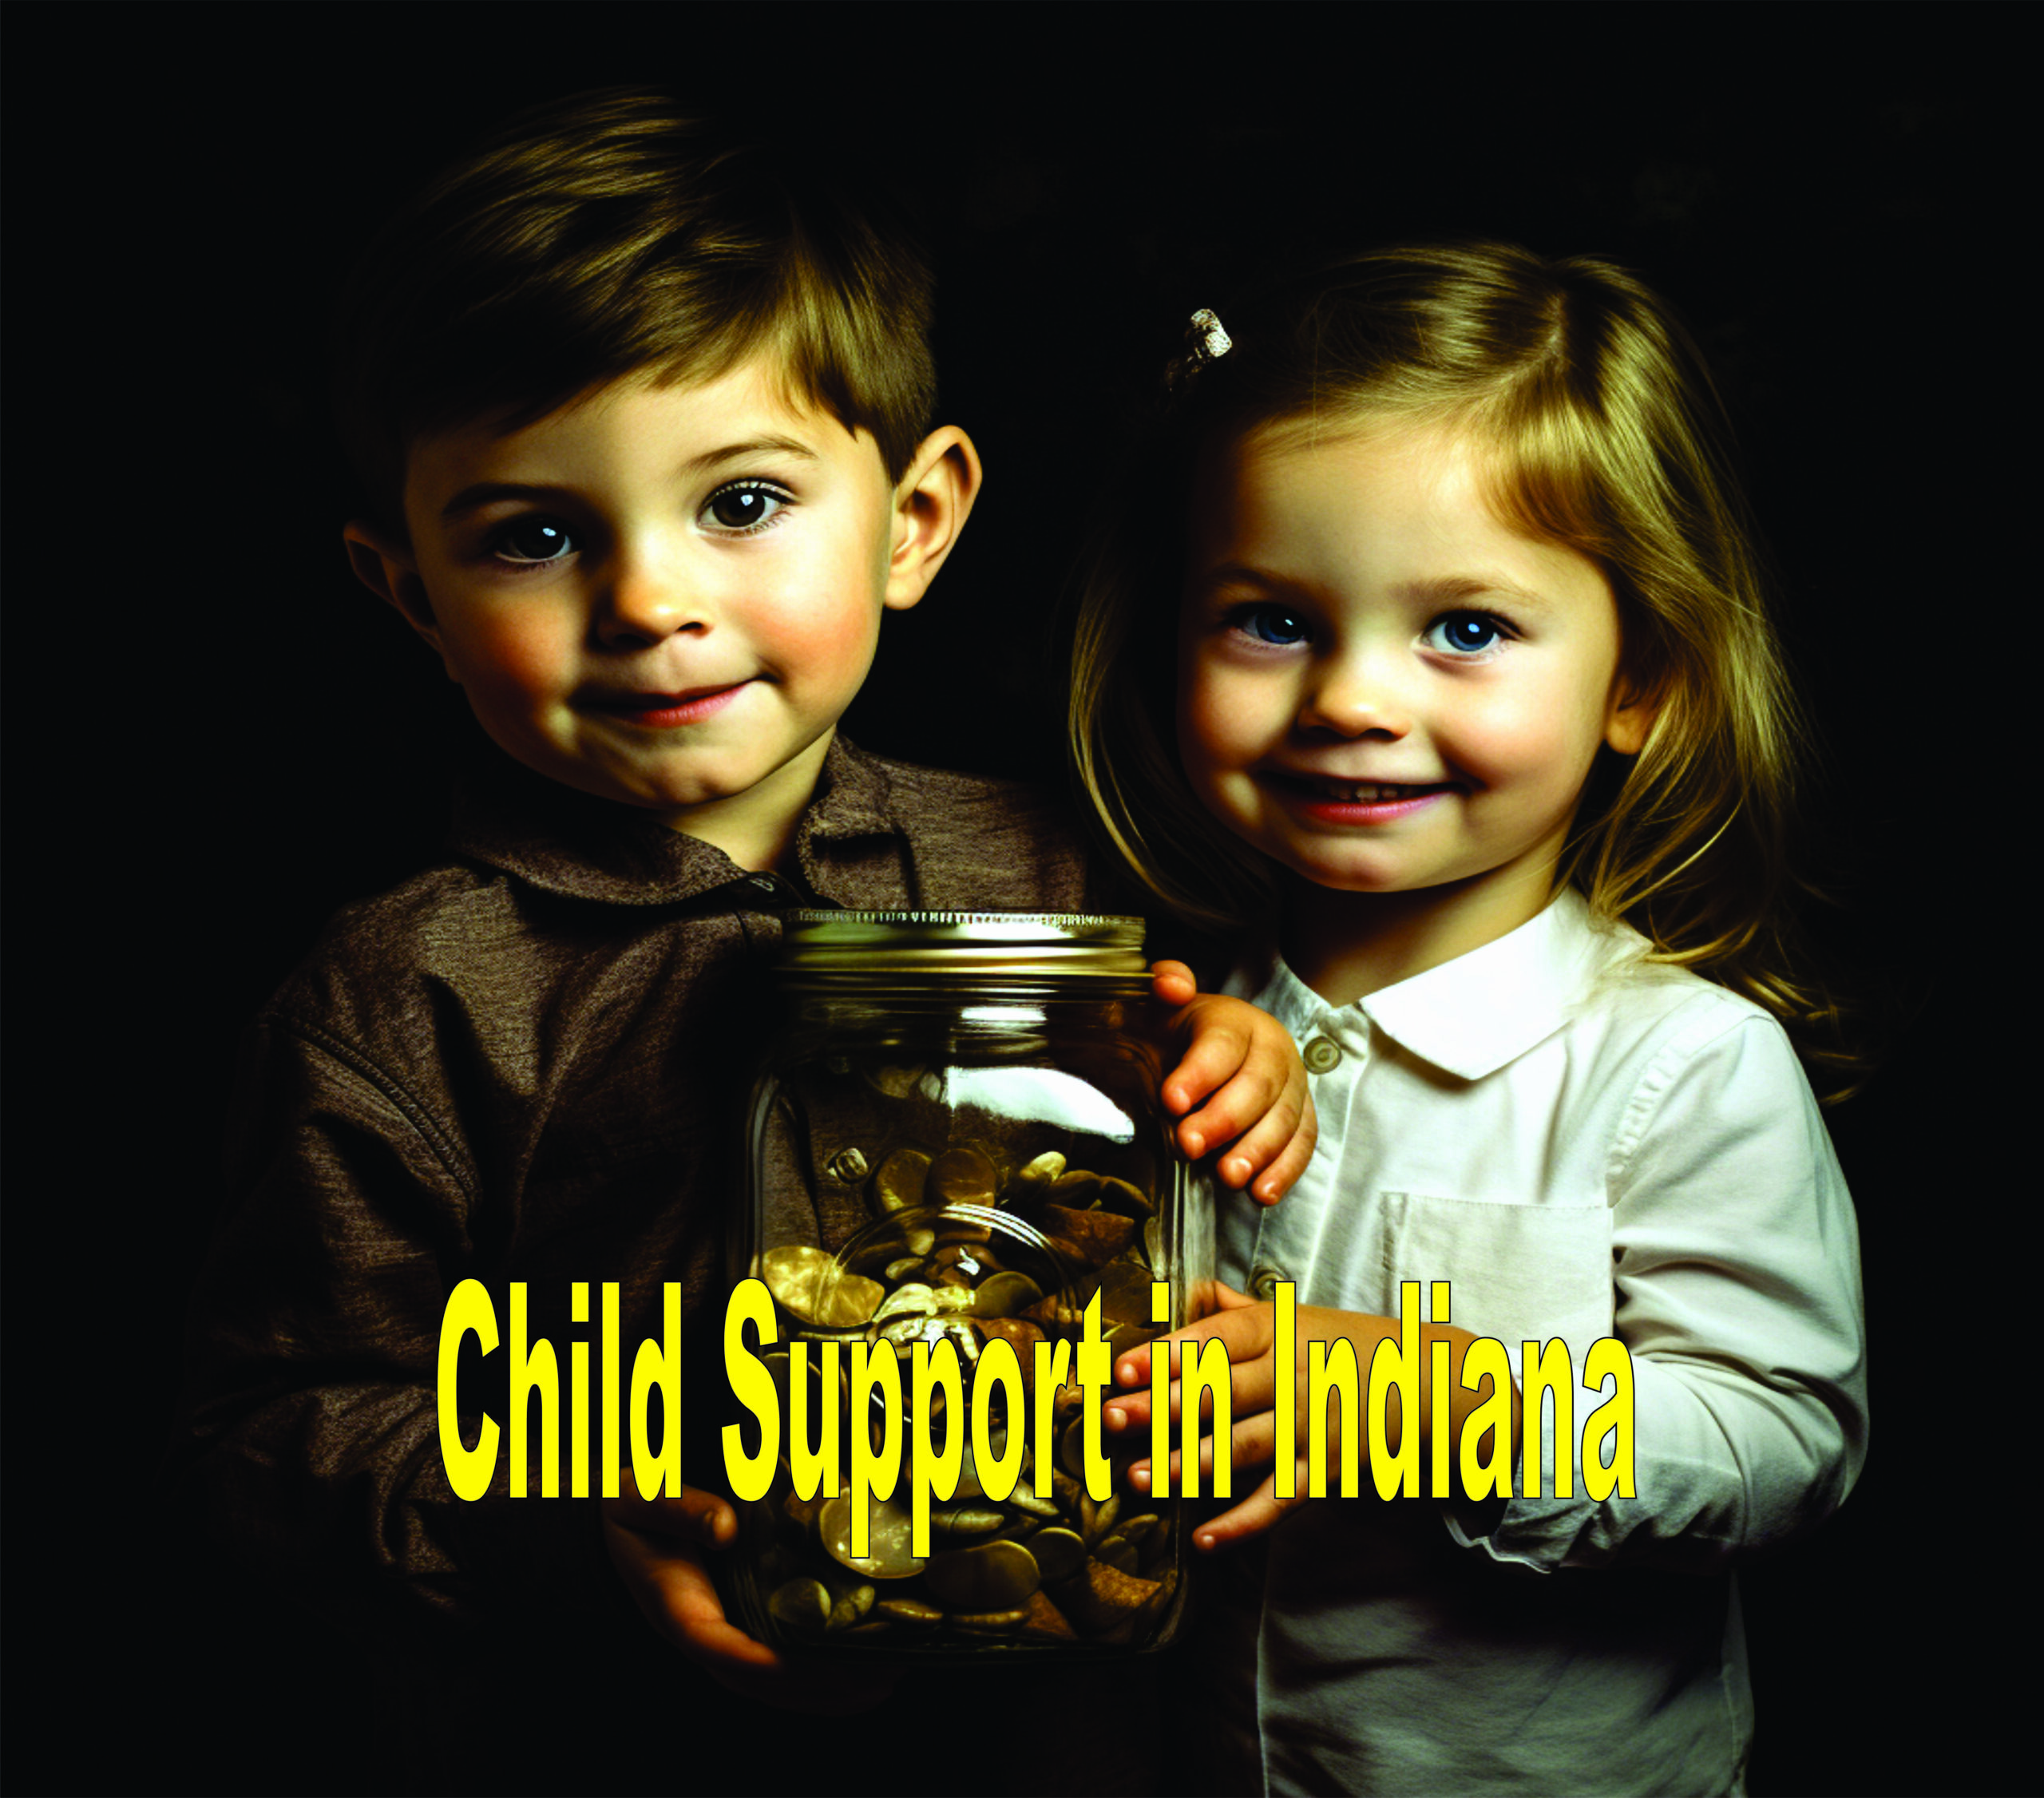 Child Support In Indiana